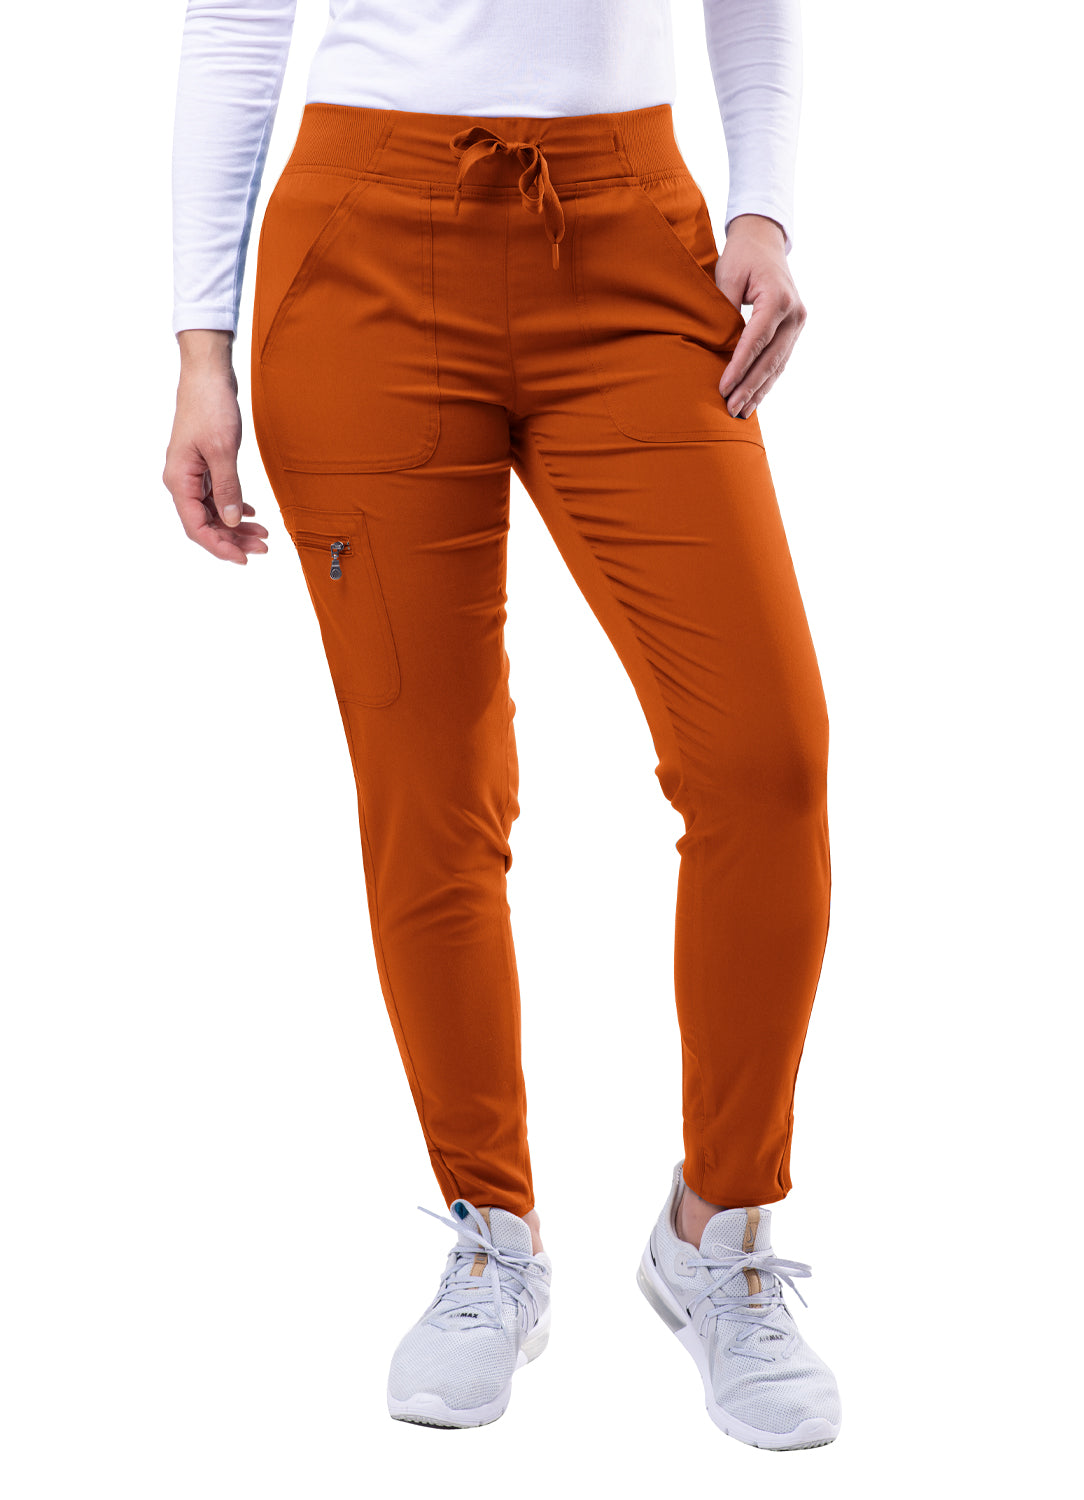 Ultimate Yoga Jogger Pant - All Colors